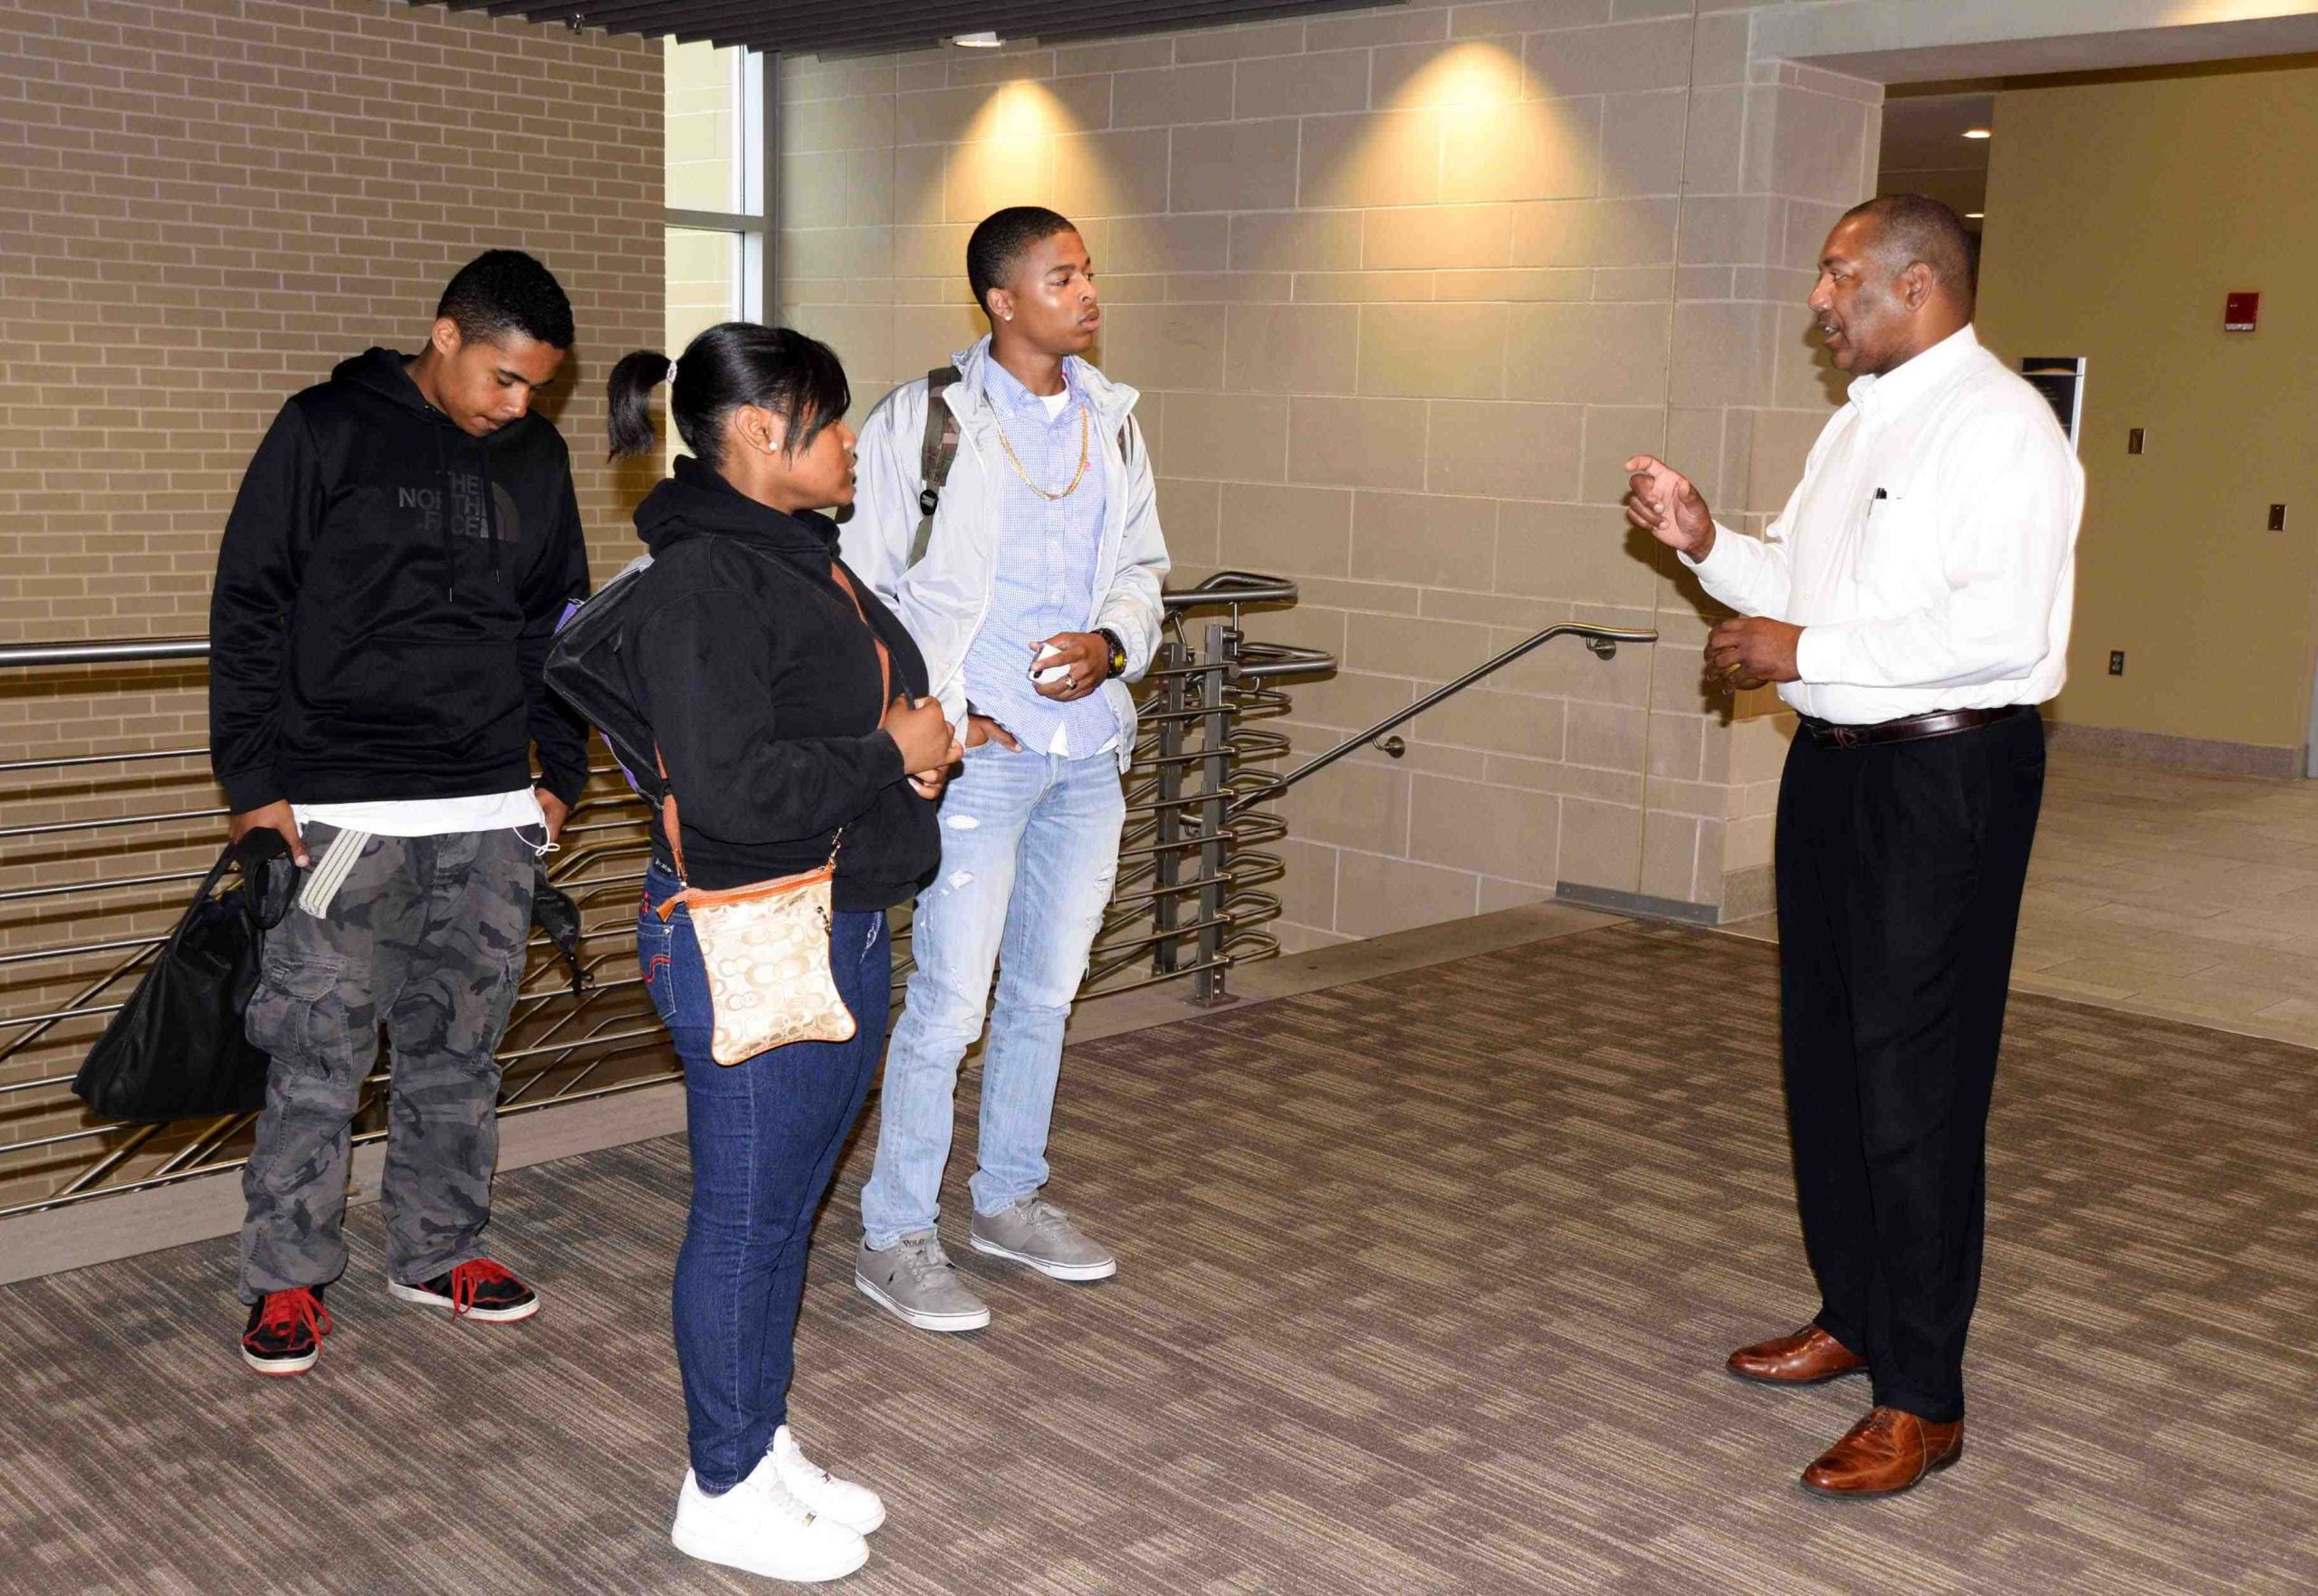 tour students listen to tour guide at Alabama State Uniersity_spring 2014_minibresized